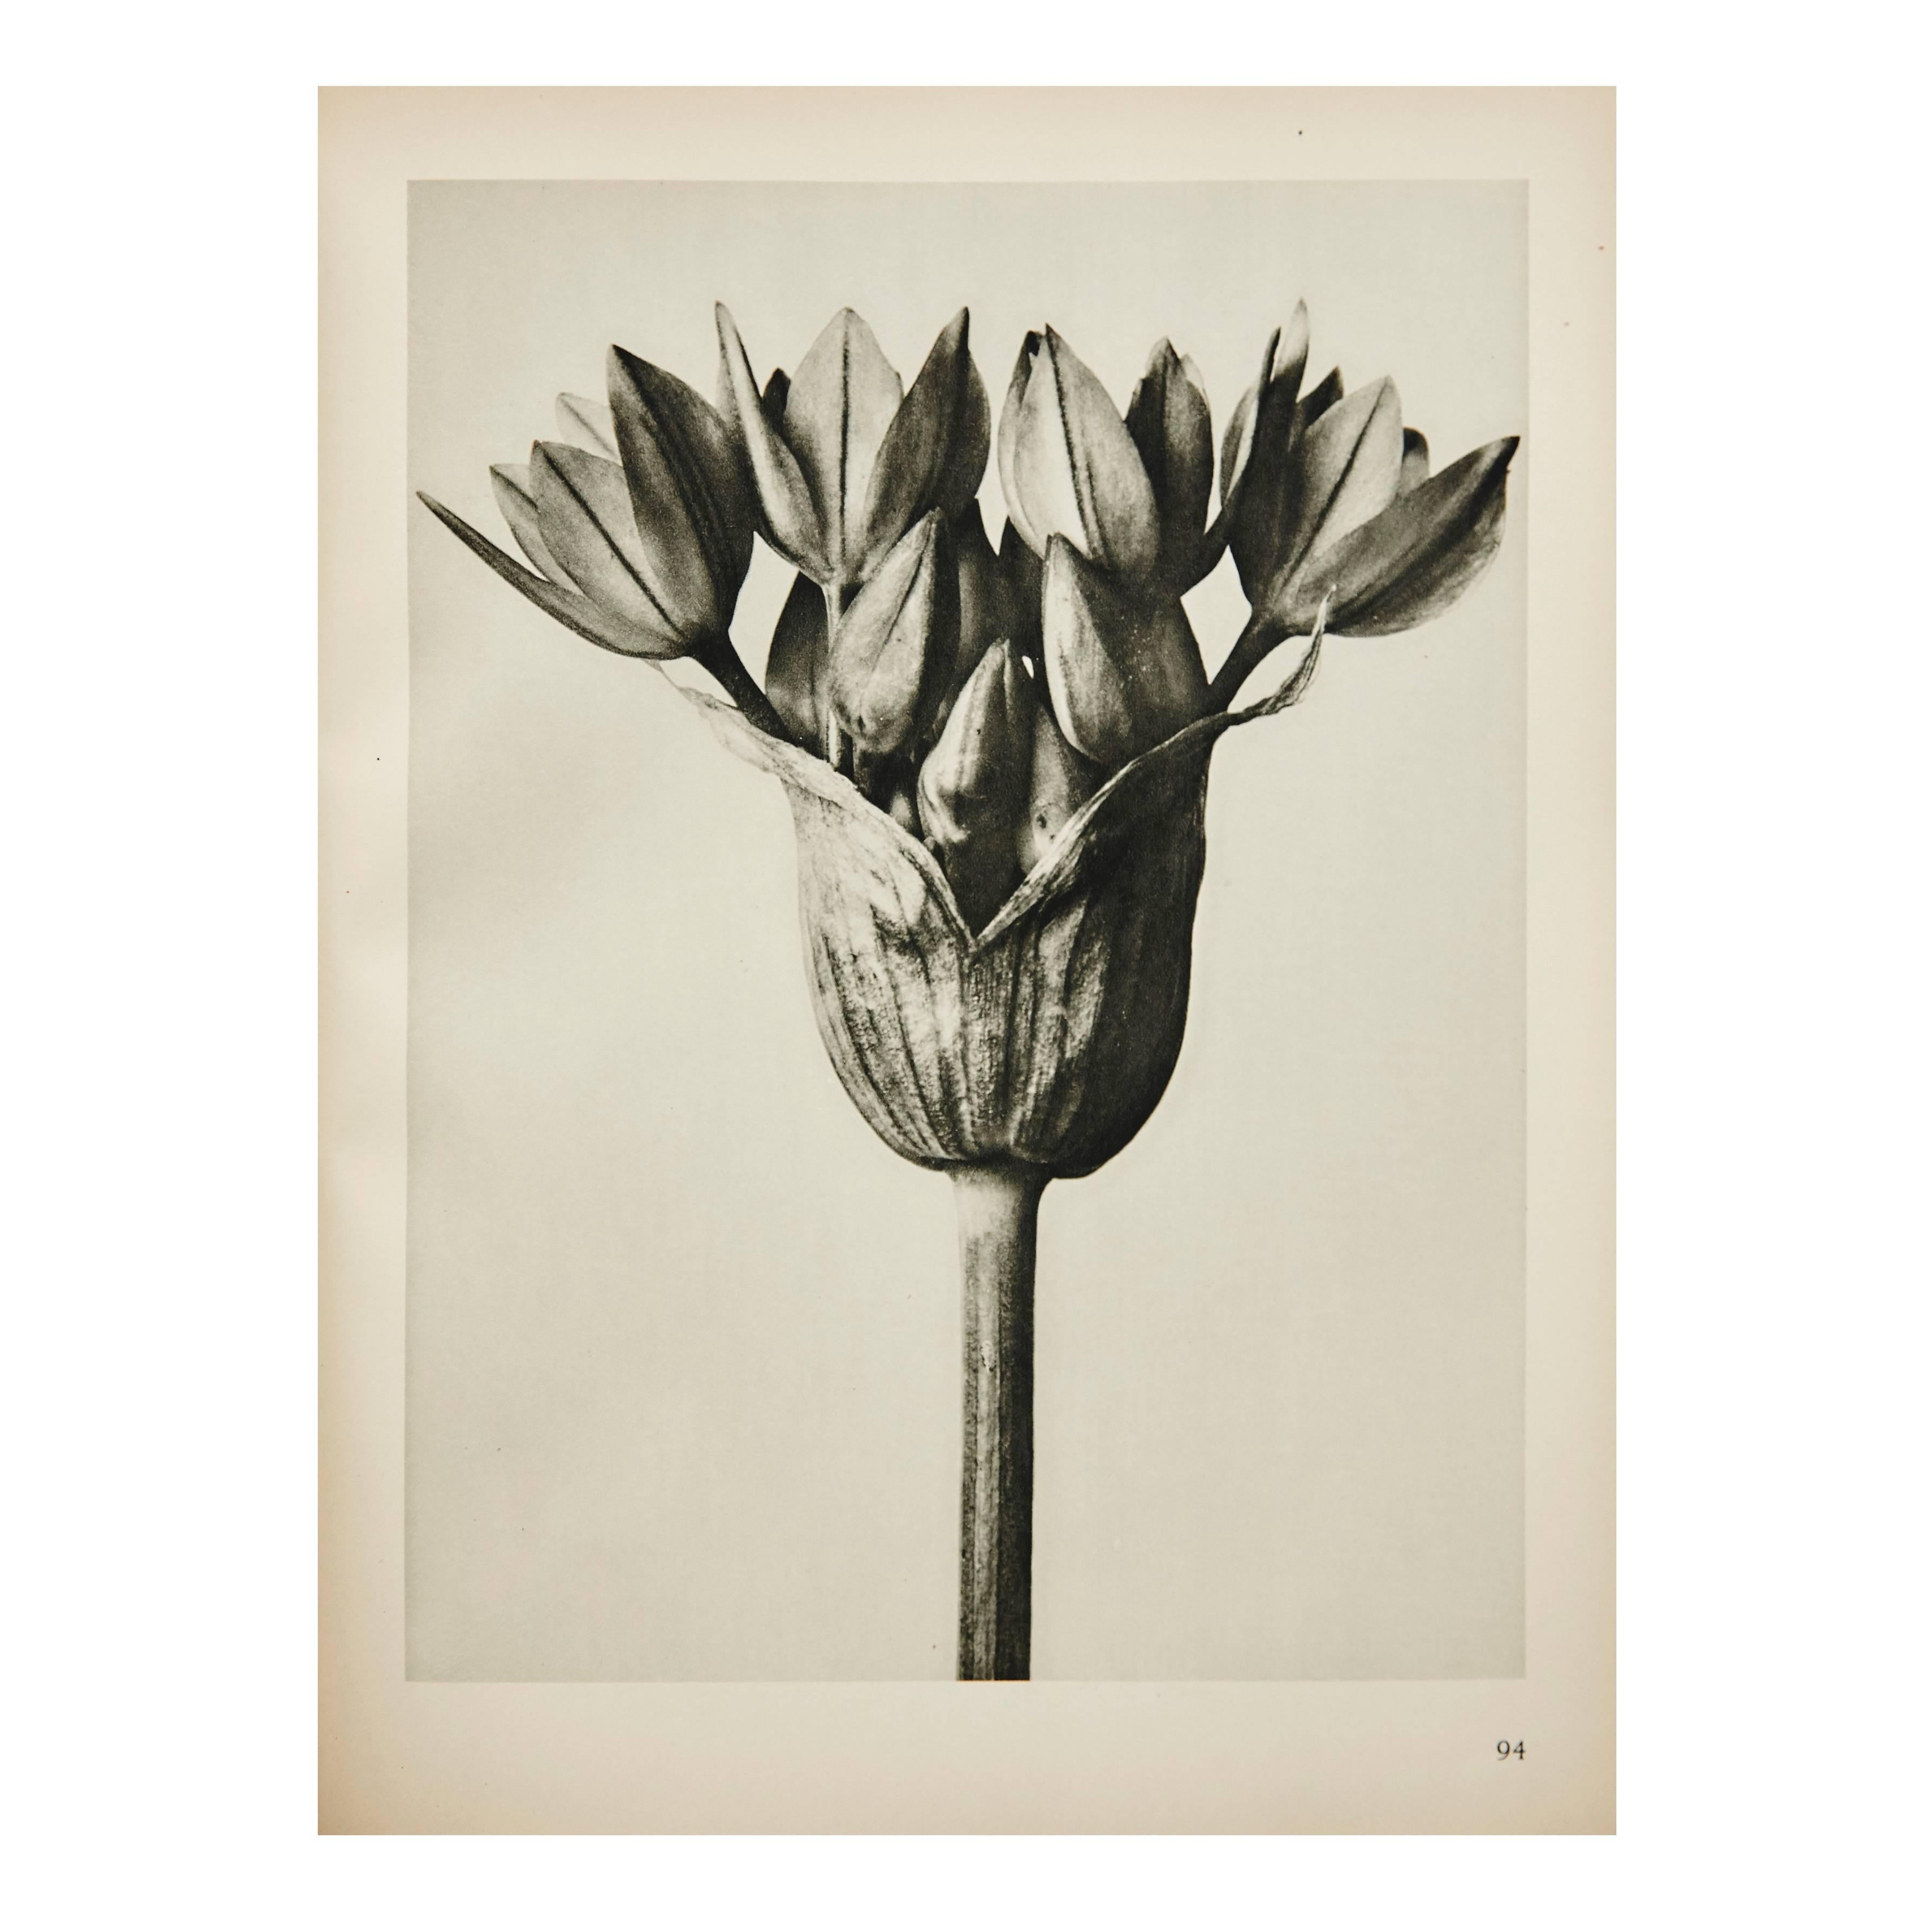 Photogravure from the First edition from Unformen Der Kunst in 1929.

In good original condition, with minor wear consistent with age and use, preserving a beautiful patina.

Karl Blossfeldt (June 13, 1865 – December 9, 1932) was a German